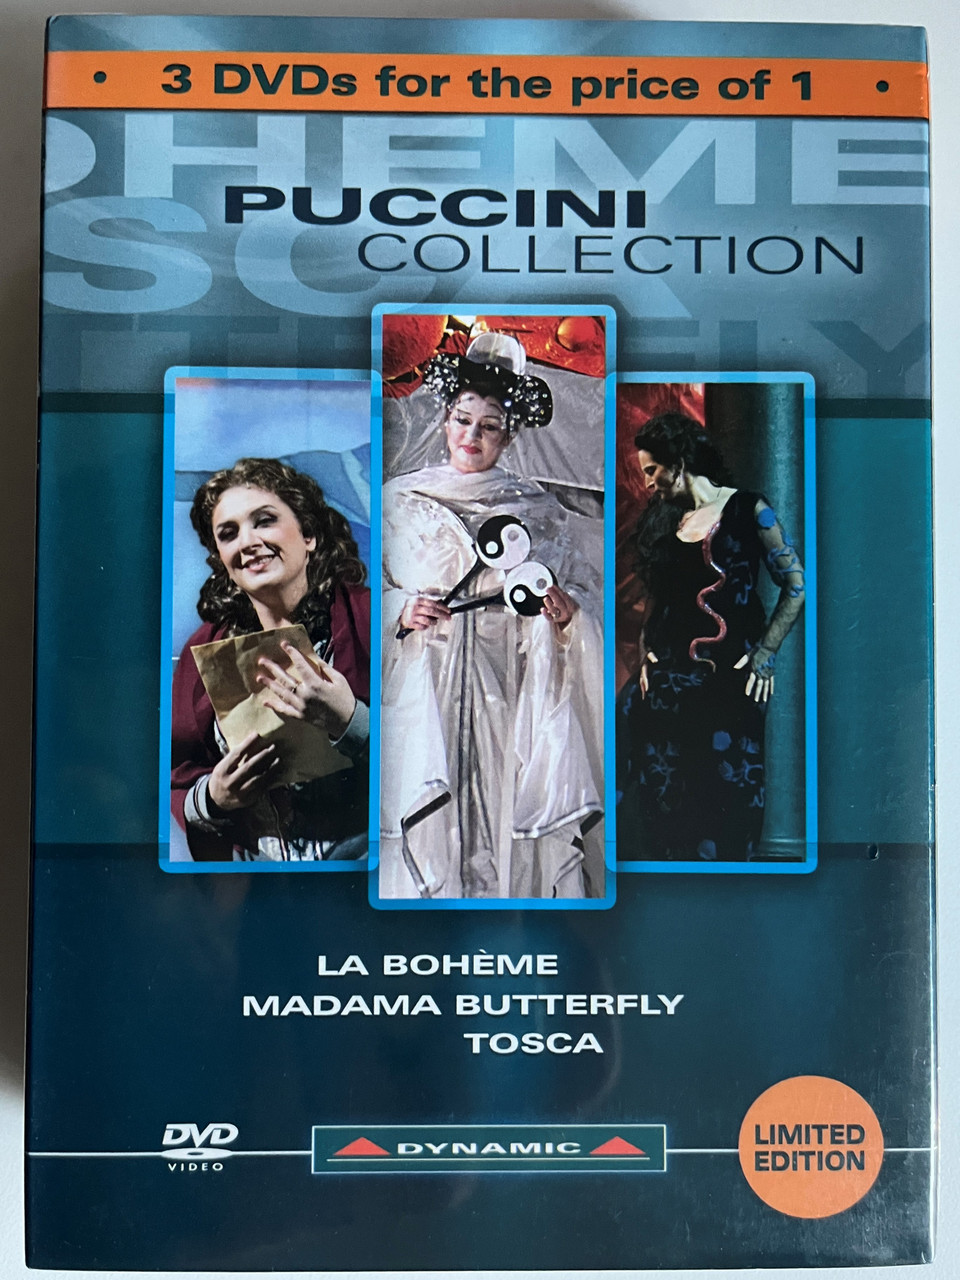 Puccini_Collection_La_Bohme_-_Madama_Butterfly_-_Tosca_3_DVDs_for_the_price_of_1_Puccini_Festival_Foundation_Orchestra_and_Chorus_of_the_Puccini_Festival_Placido_Domingo___04657.1691404147.1280.1280.jpg (960×1280)